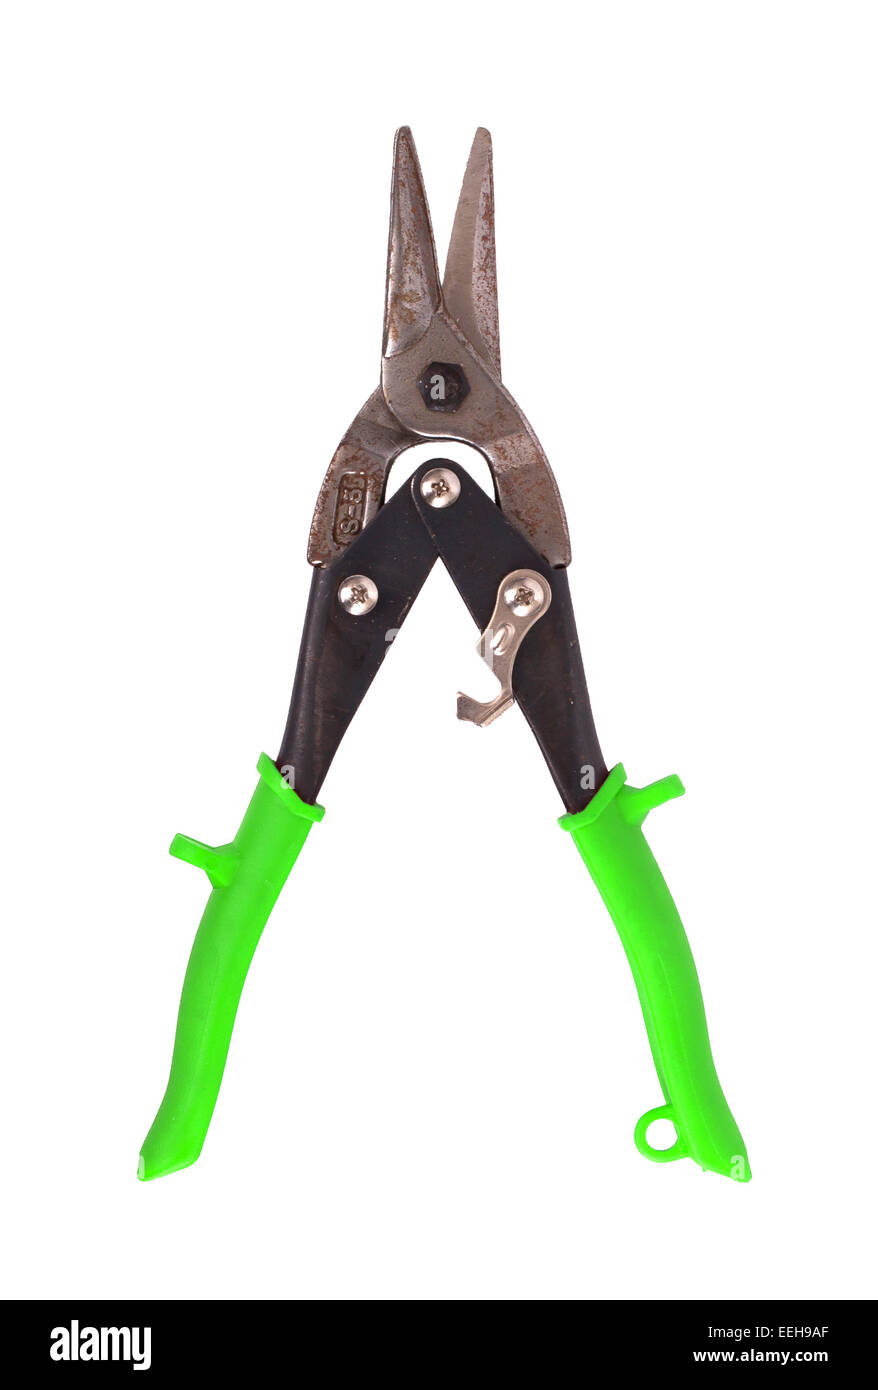 Heavy duty scissors isolated on white background, green Stock Photo